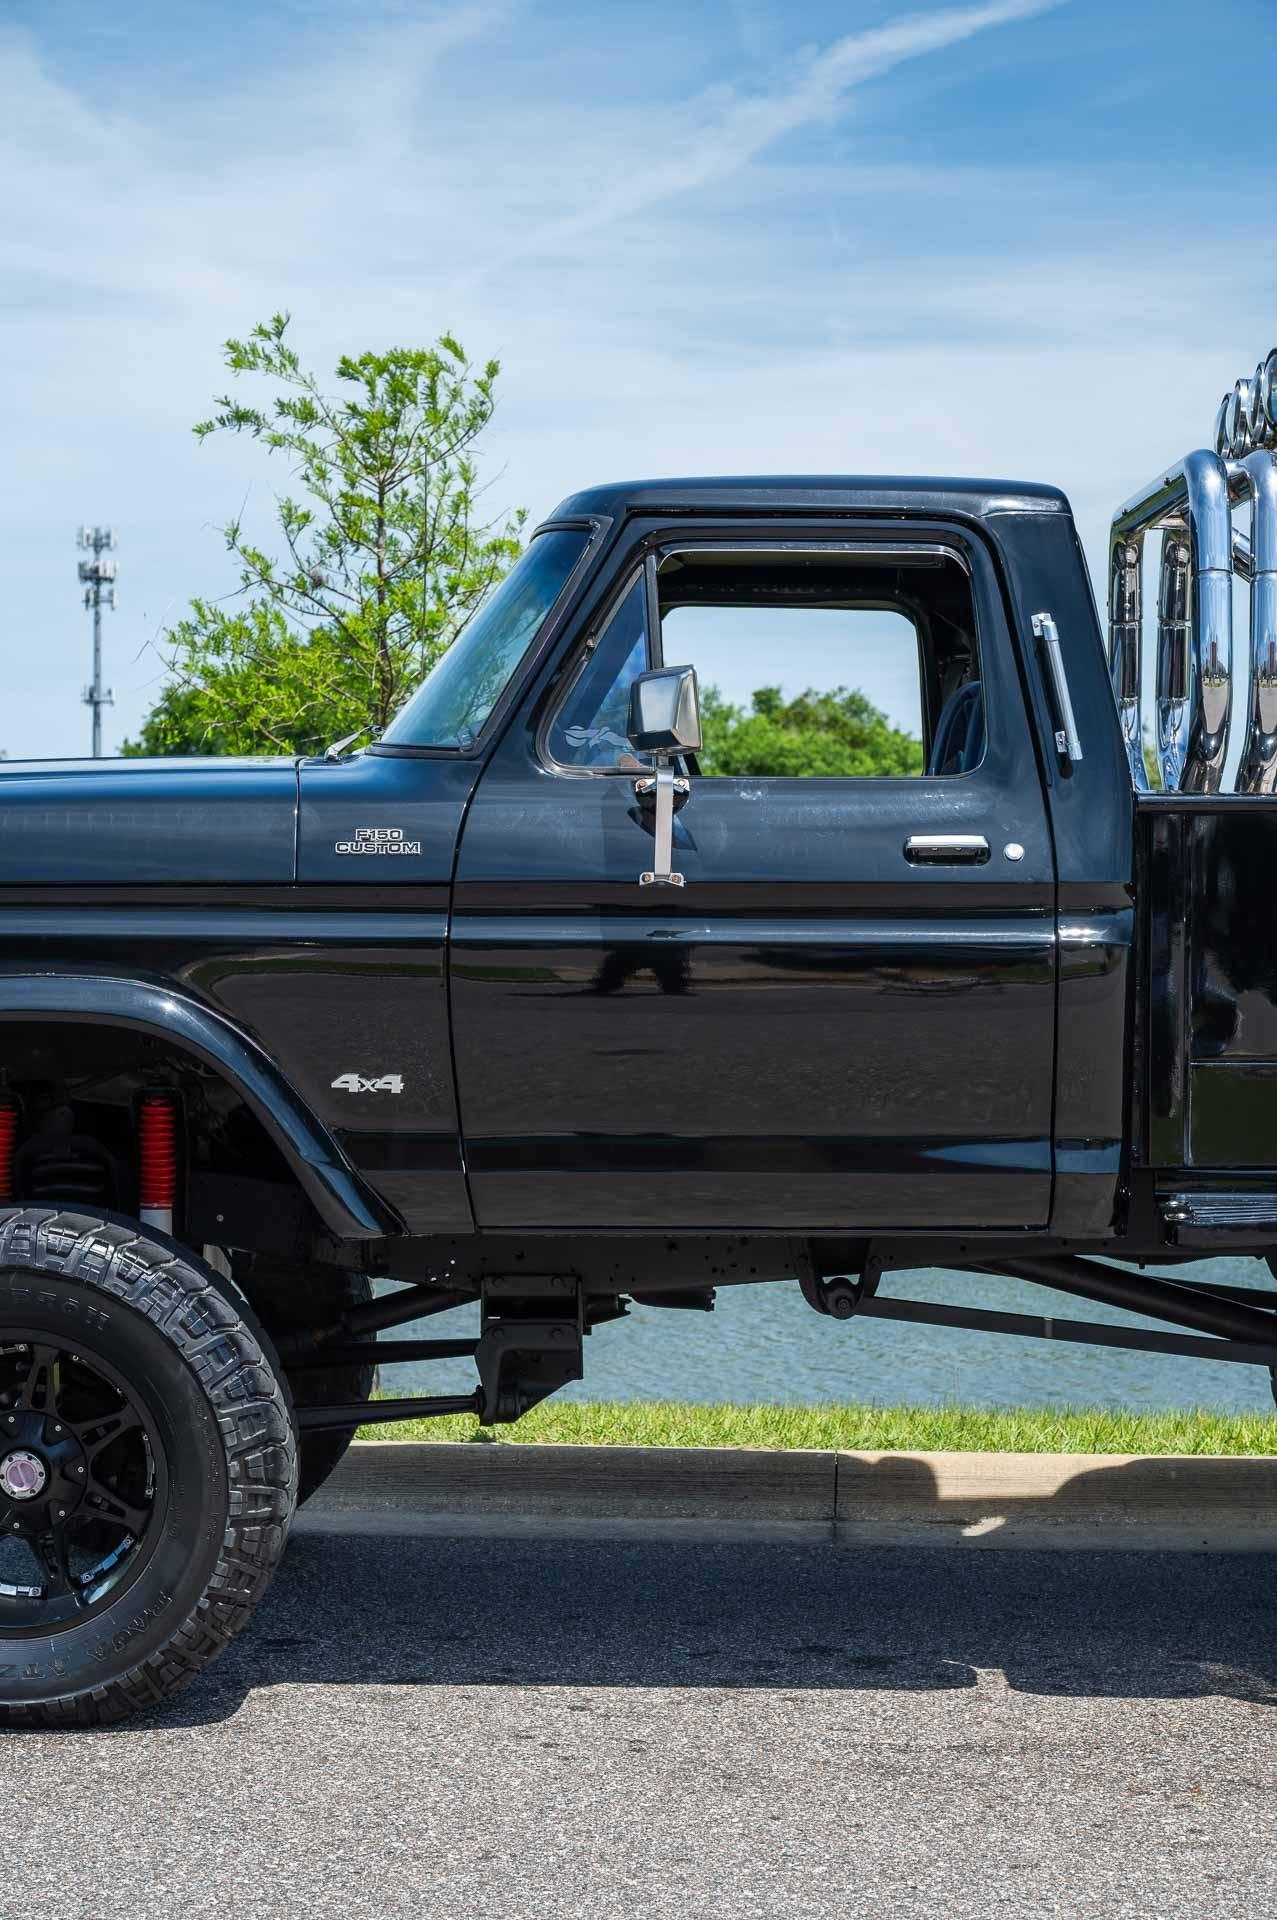 1979 Ford F150 Lifted Monster Truck photo